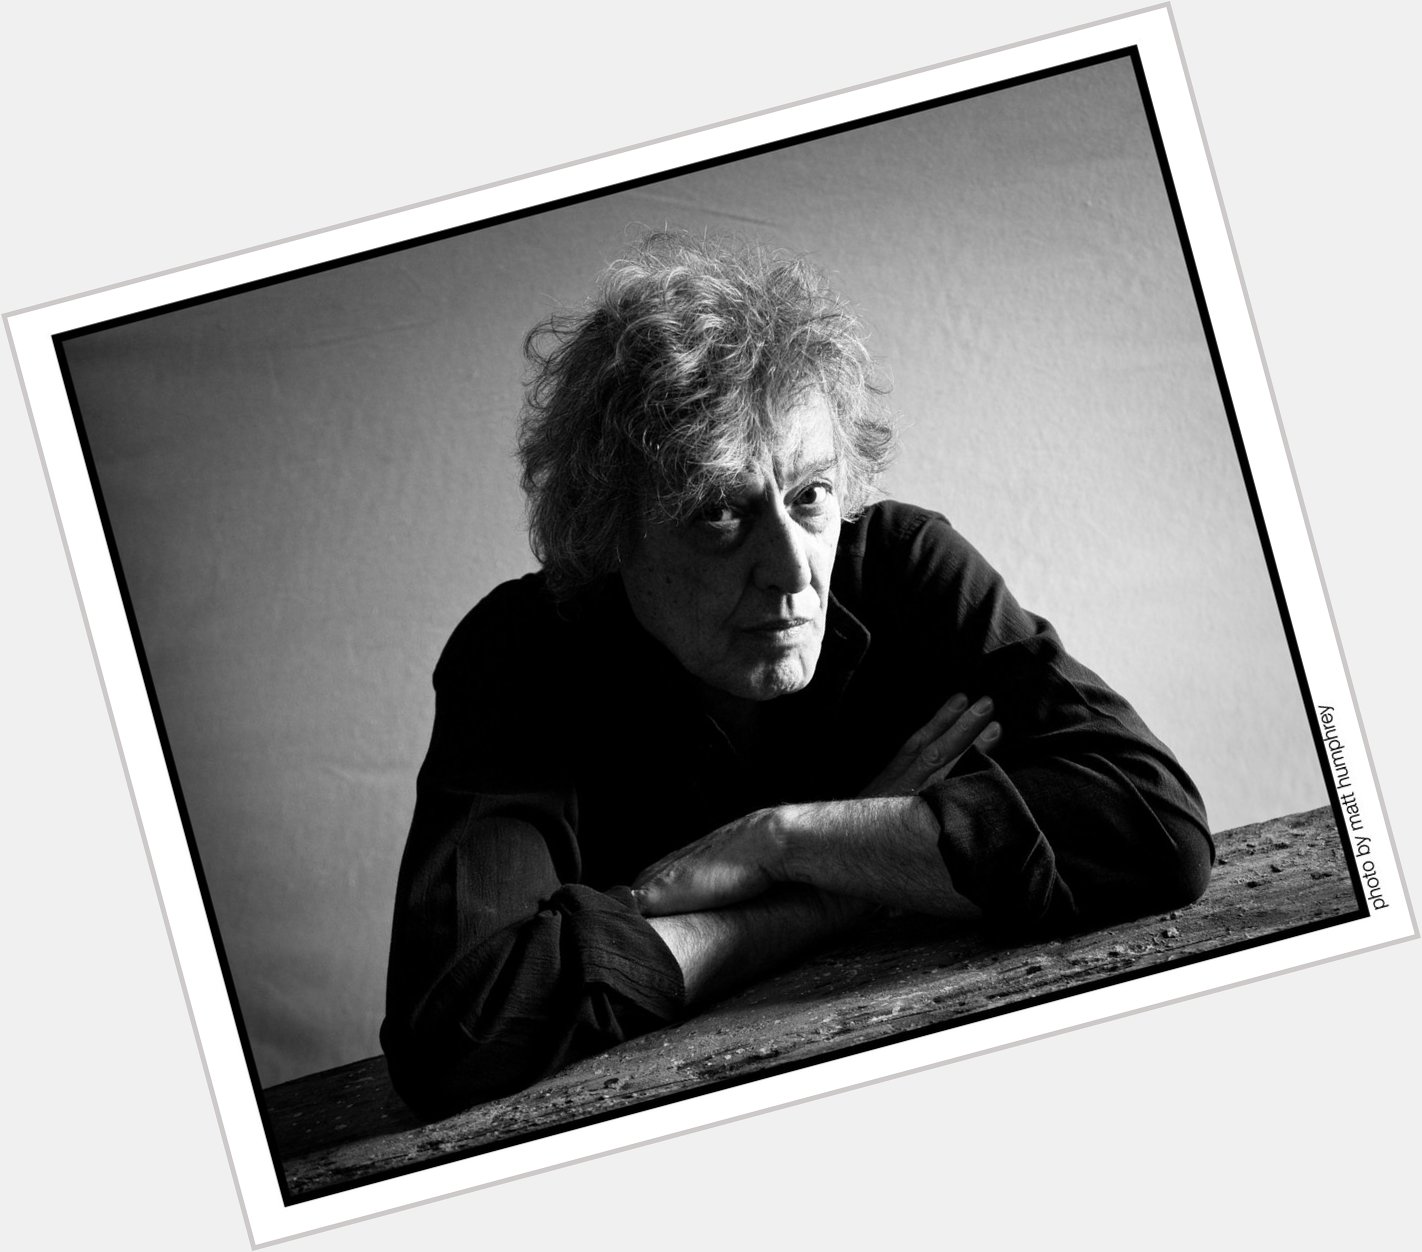 Wishing Tom Stoppard a very happy 80th birthday today. What\s your favourite play by the writer? 